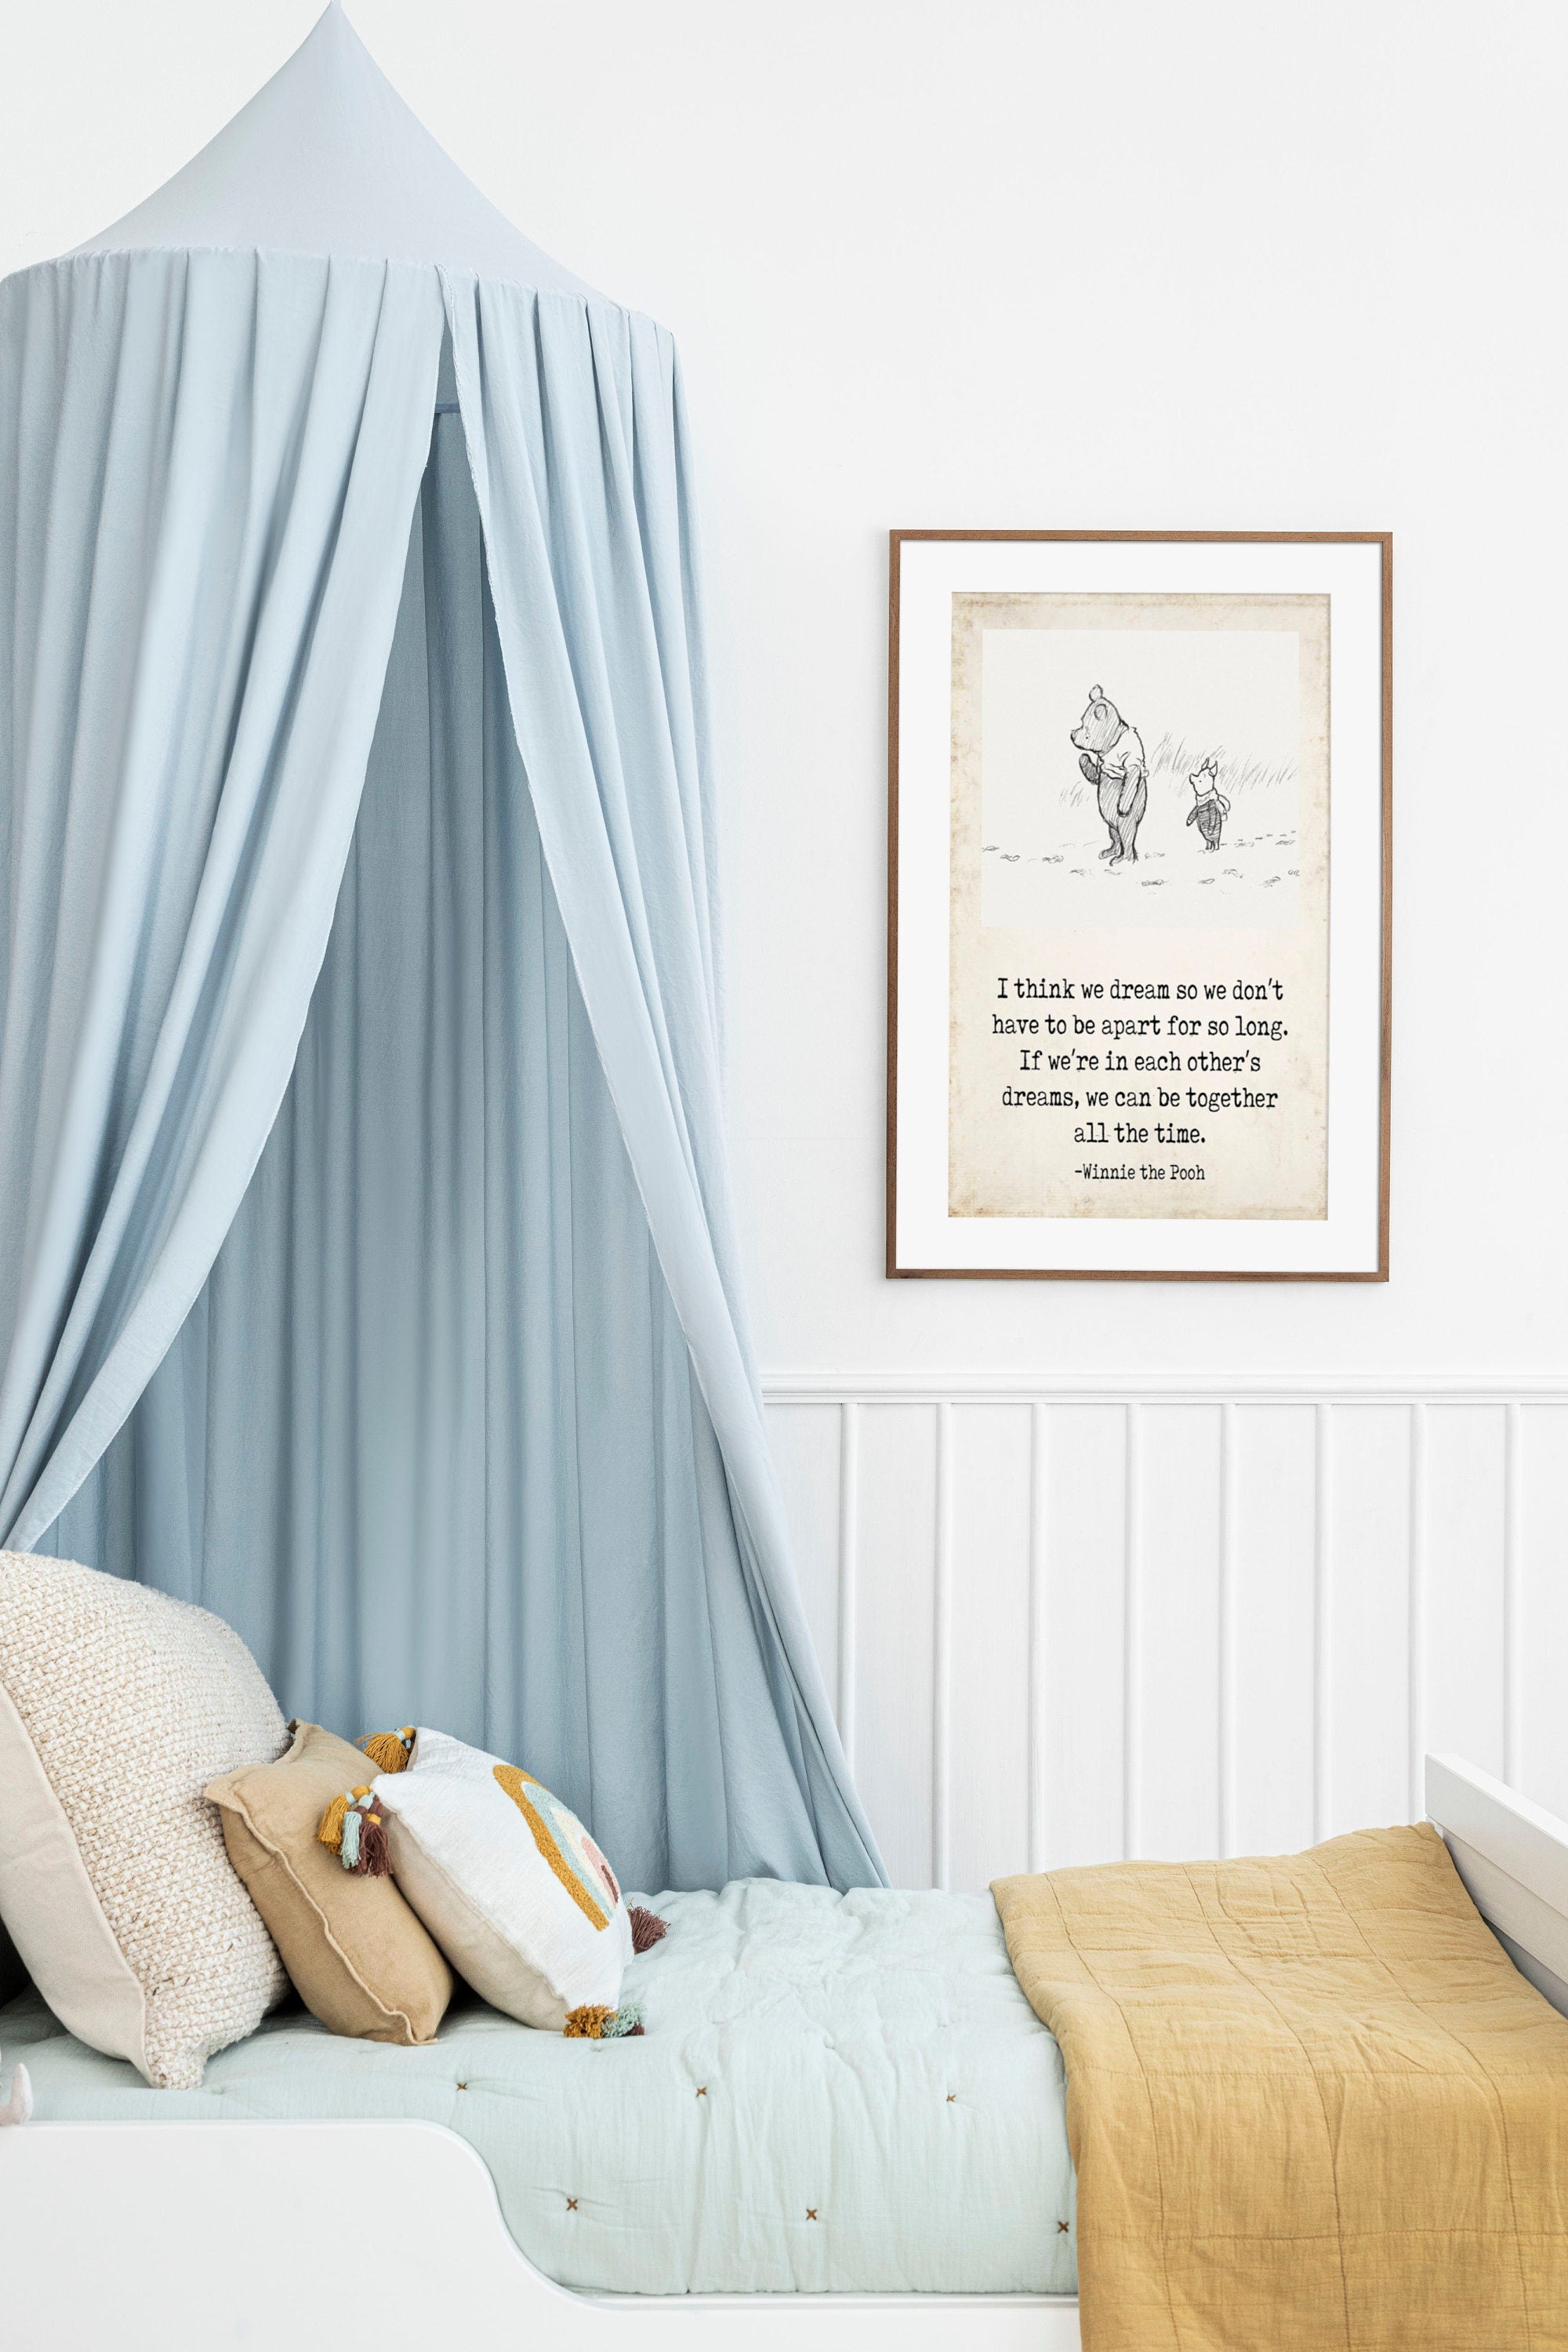 I Think We Dream Winnie the Pooh Quote Unframed or Framed Nursery Wall Art Prints in Vintage Style with Pooh & Piglet Drawing, AA Milne